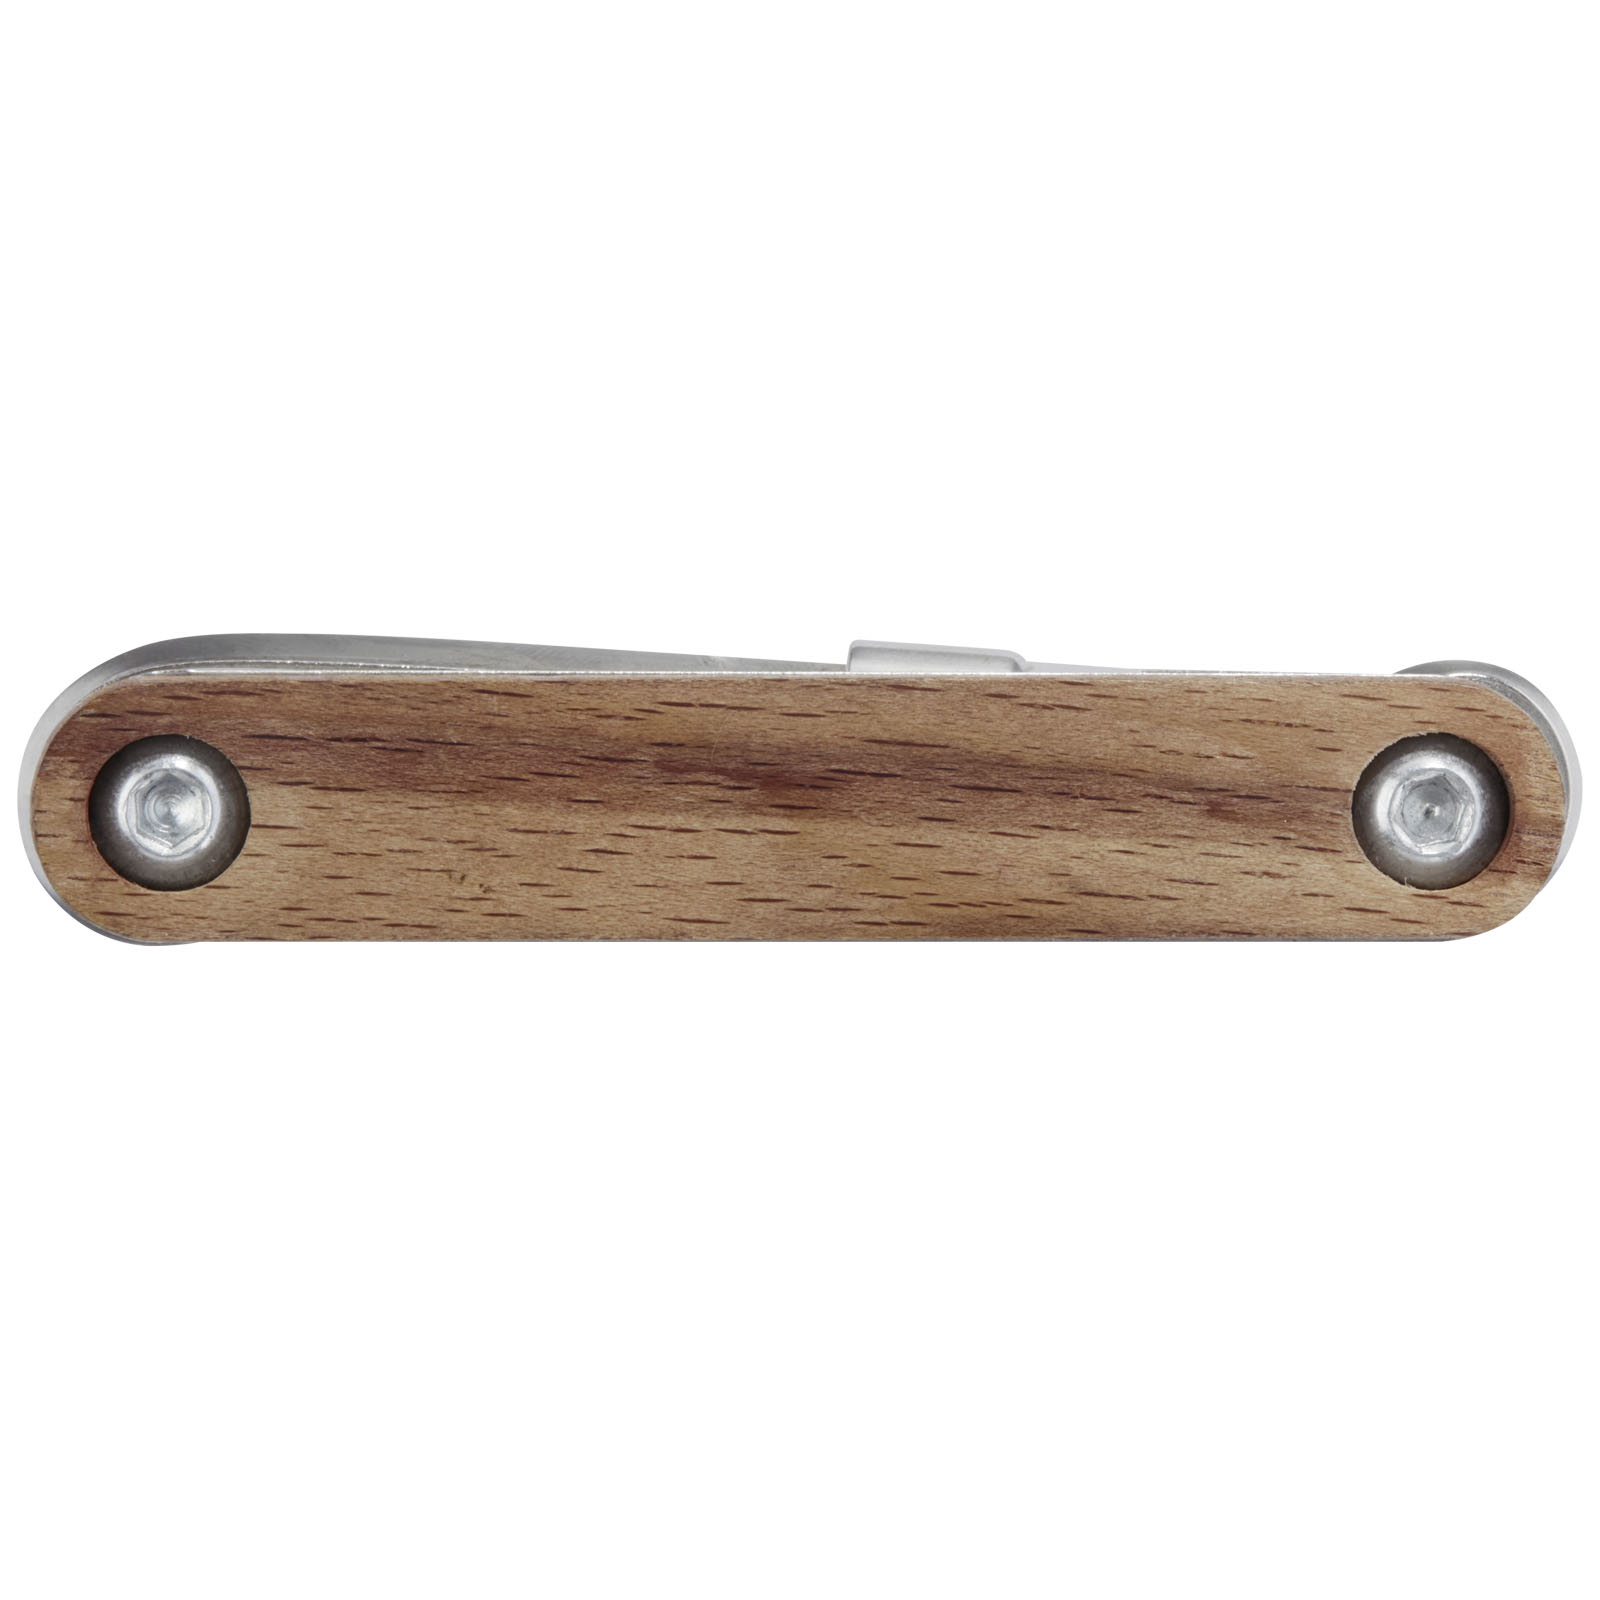 Advertising Multitools - Fixie 8-function wooden bicycle multi-tool - 2